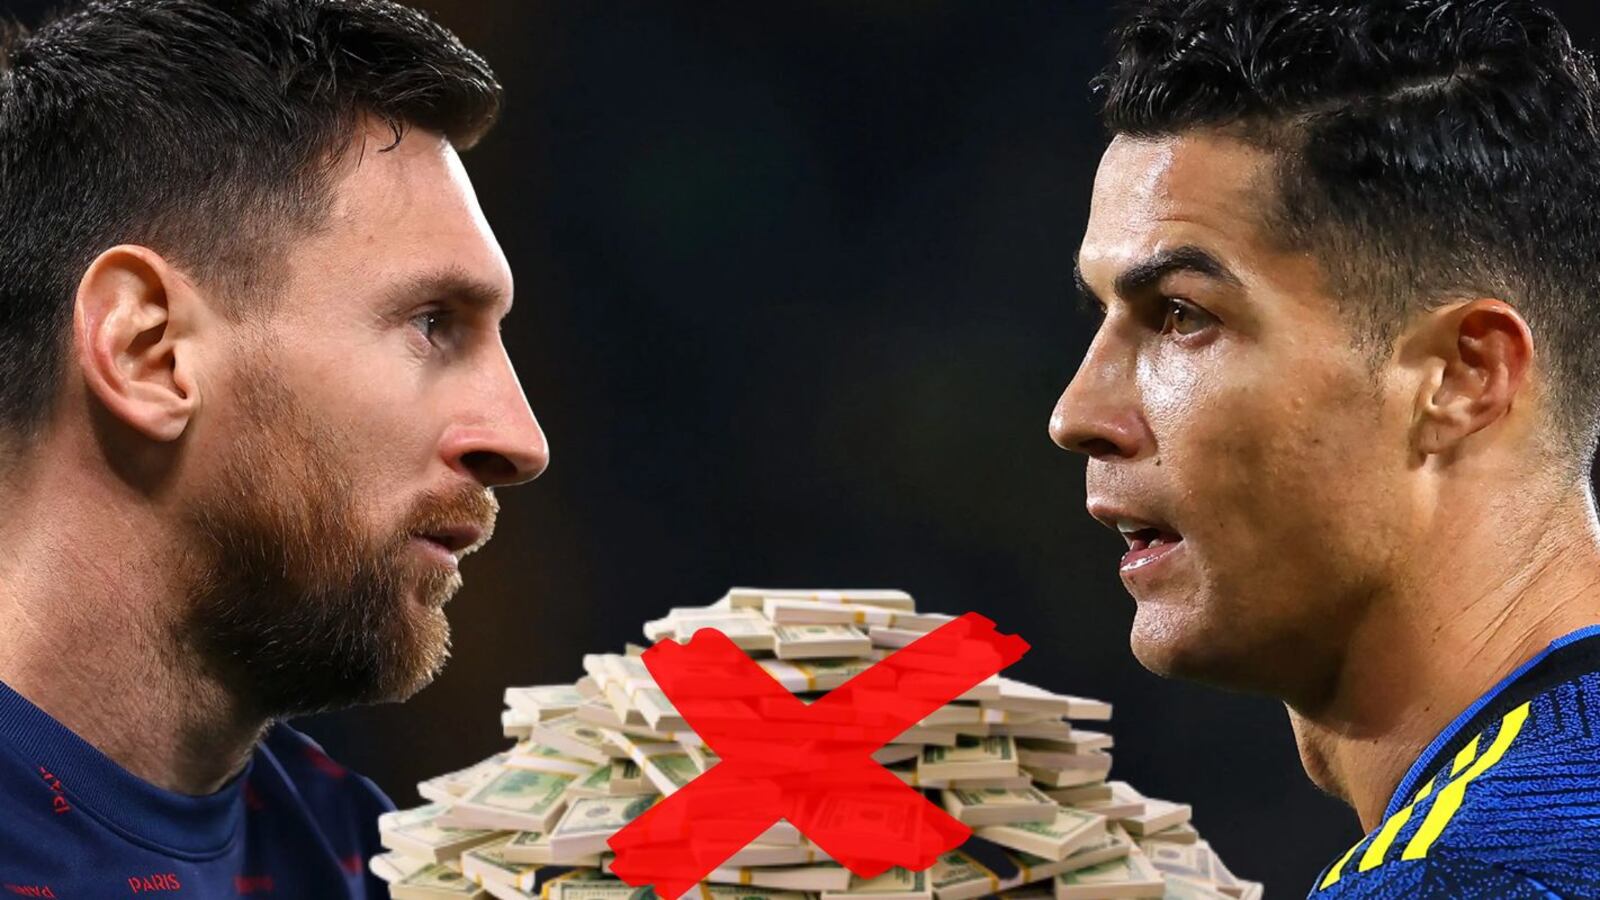 The millionaire difference between Cristiano and Messi and it's not the money